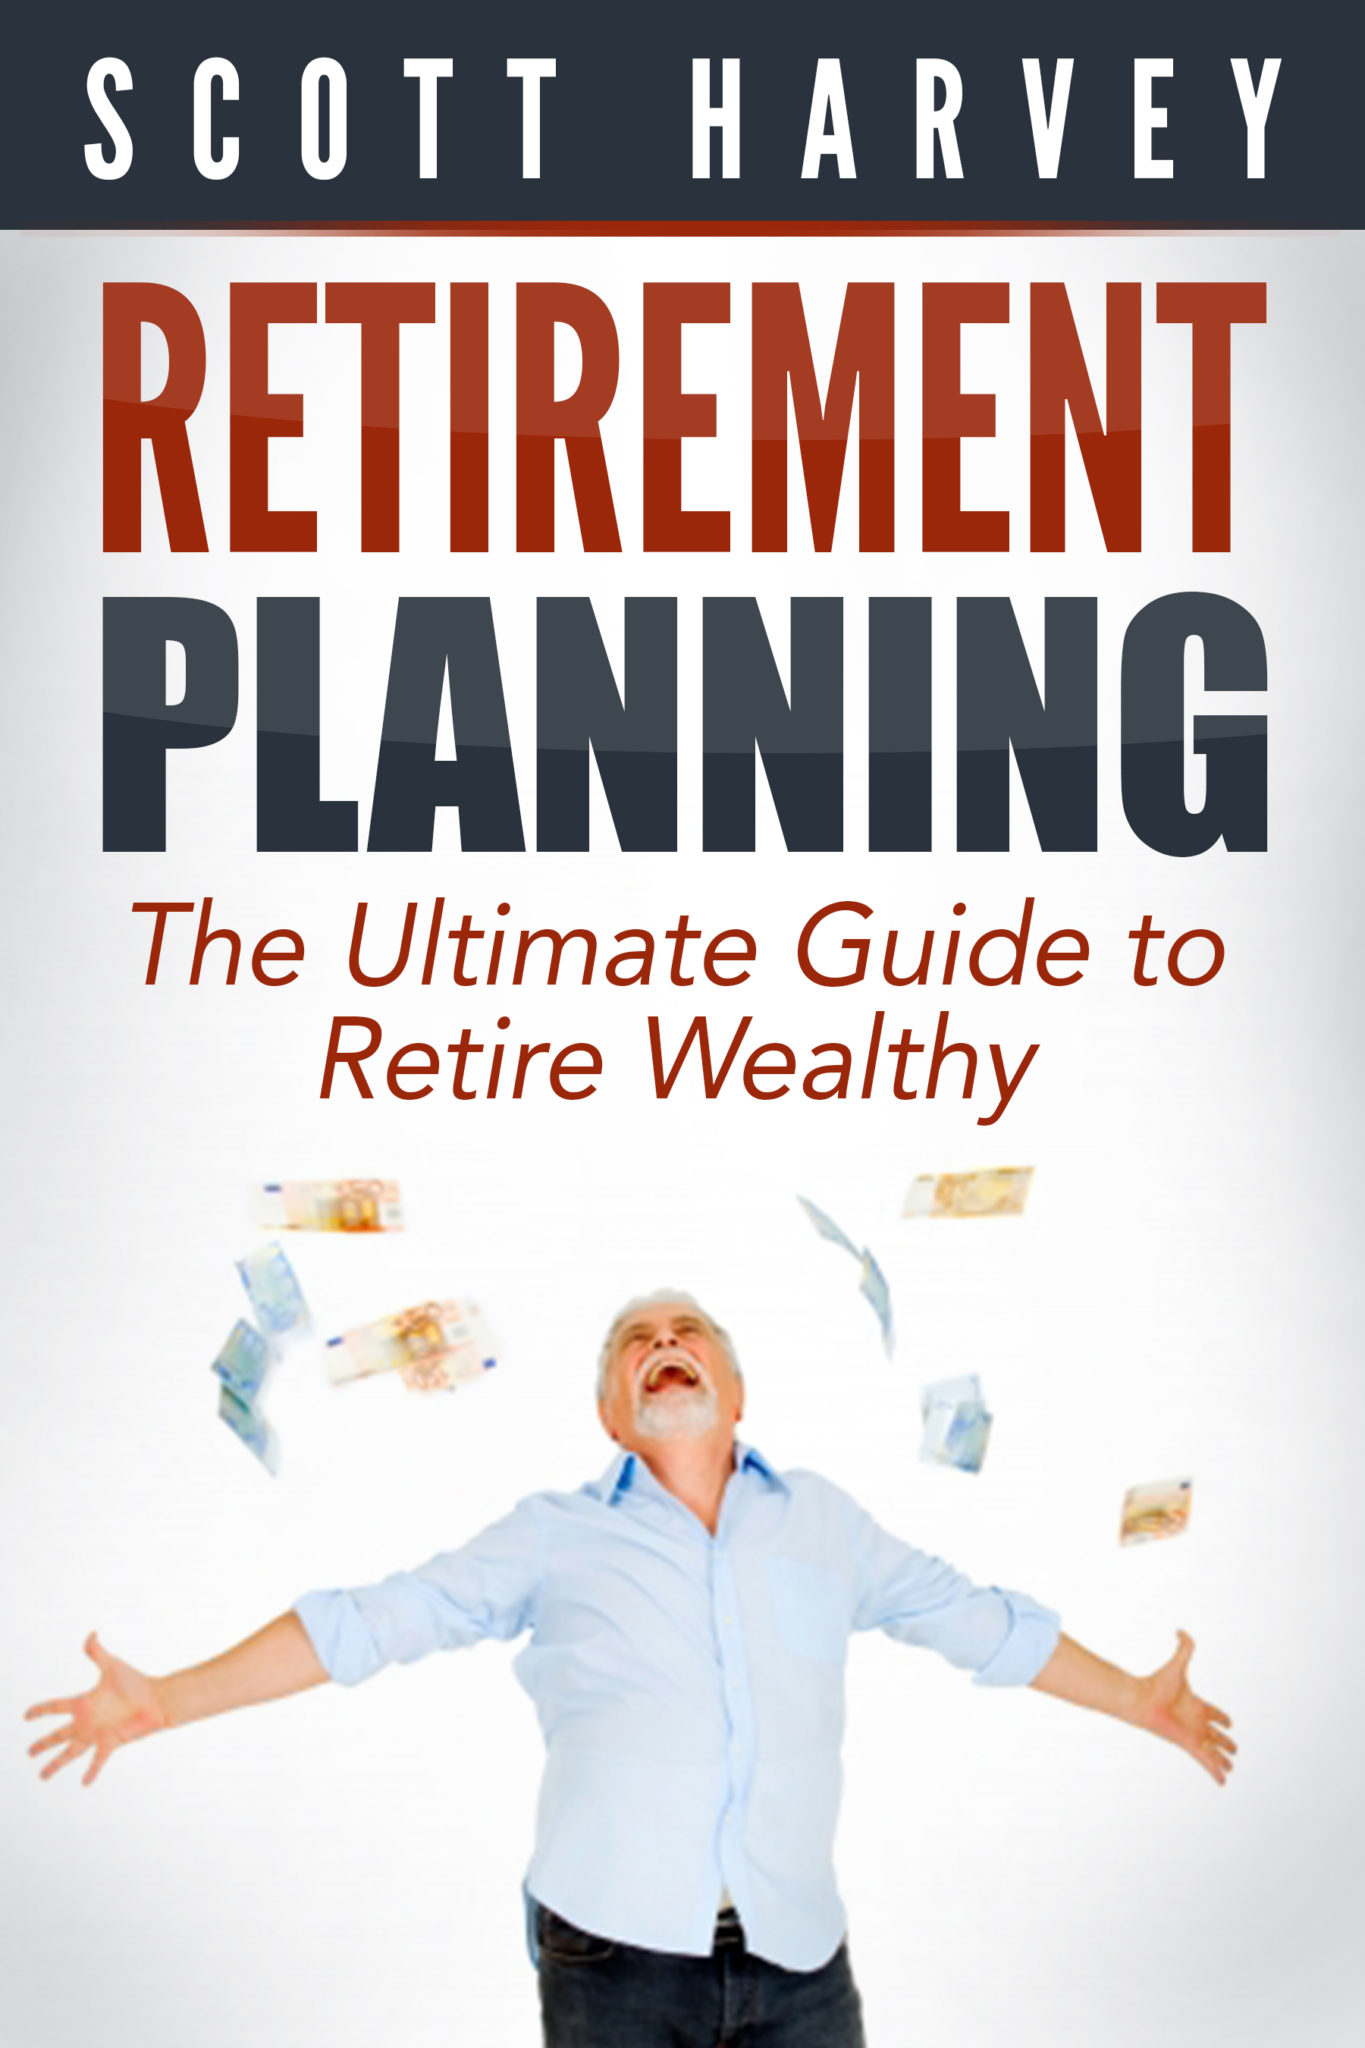 FREE: Retirement Planning: The Ultimate Guide To Retire Wealthy by Scott Harvey